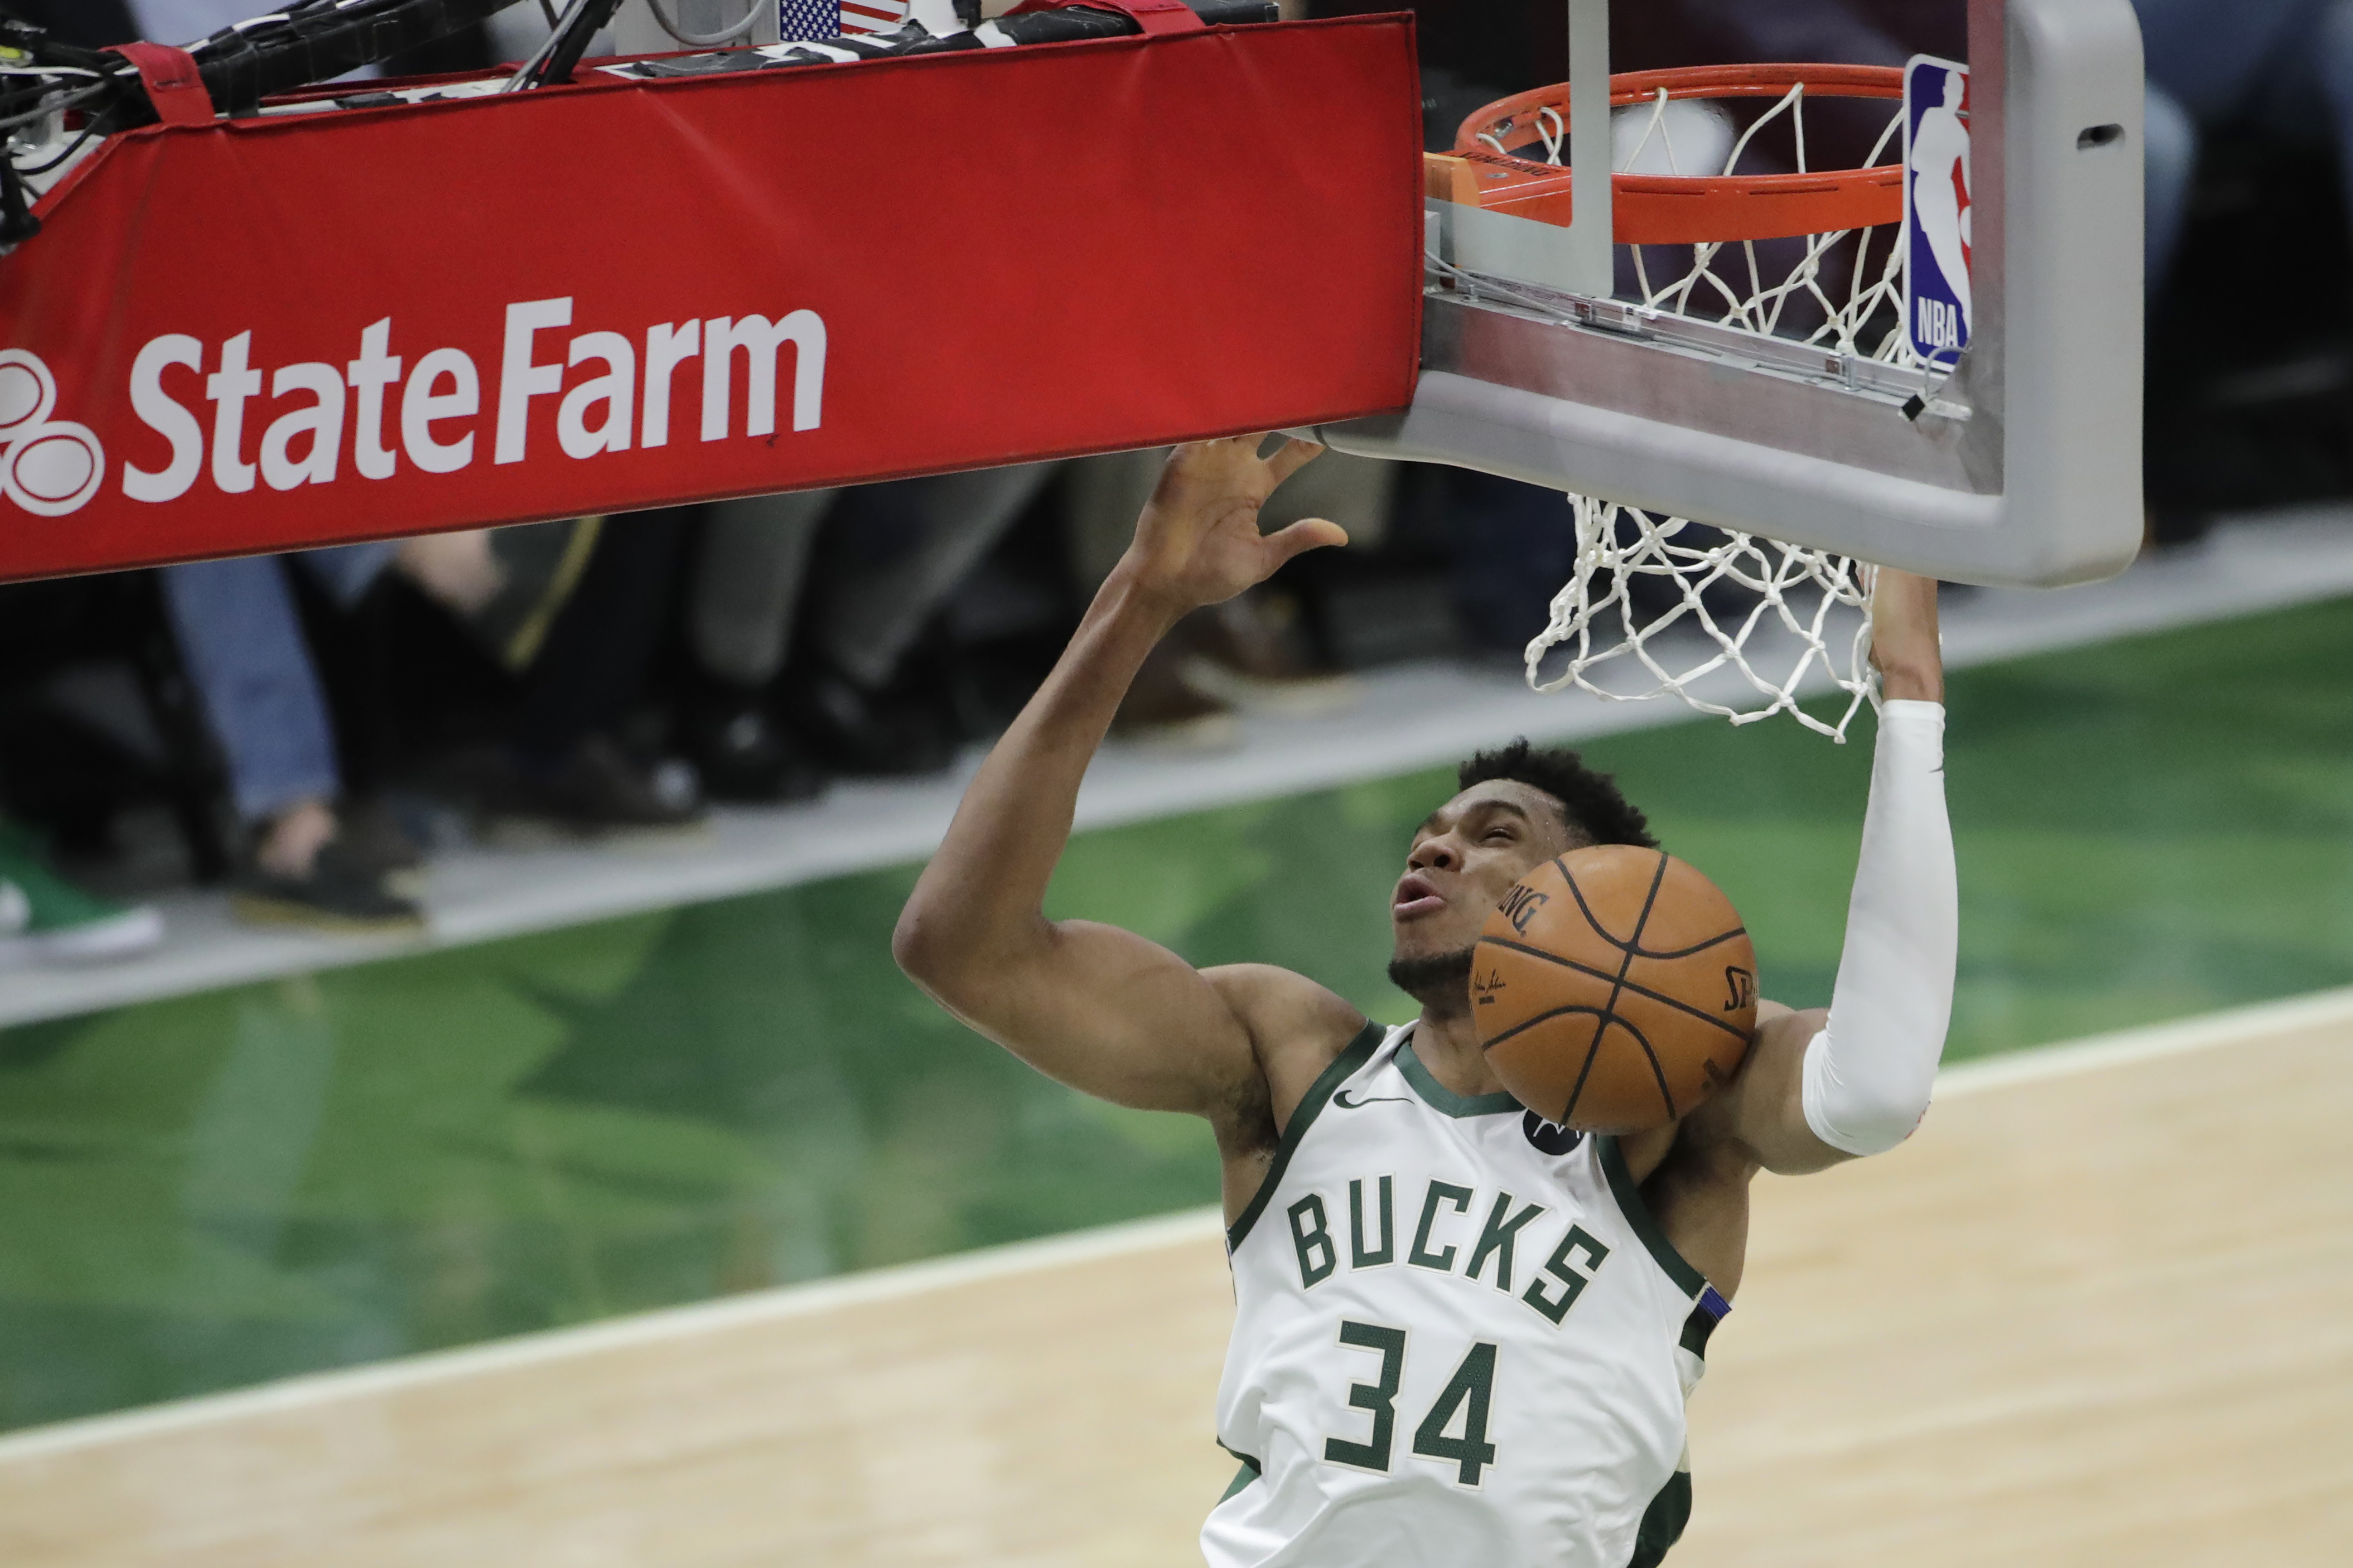 Bucks-Suns Game 5 live stream (7/17) How to watch NBA Finals online, TV, time